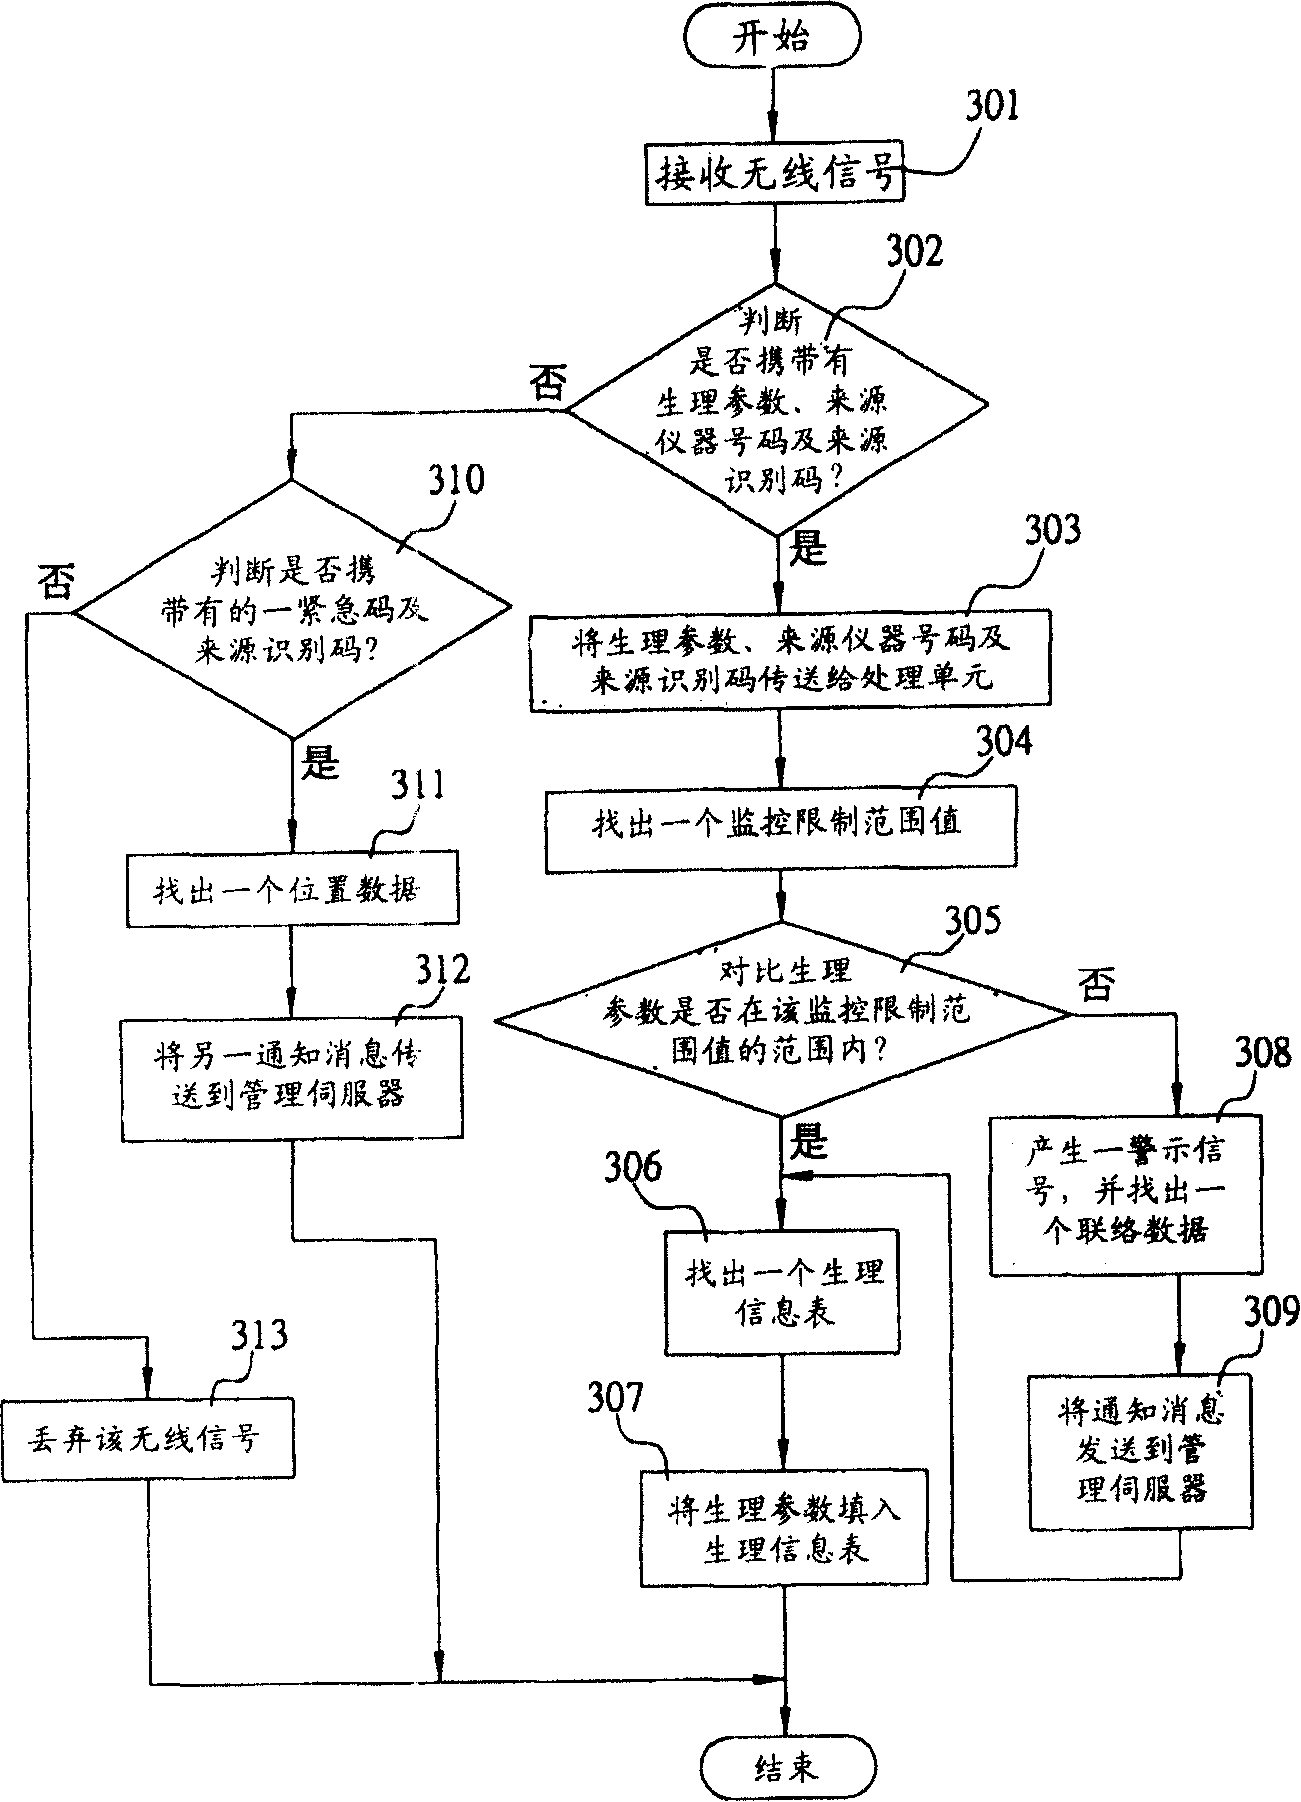 Information acquisition devices and methods for collecting physiological parameter